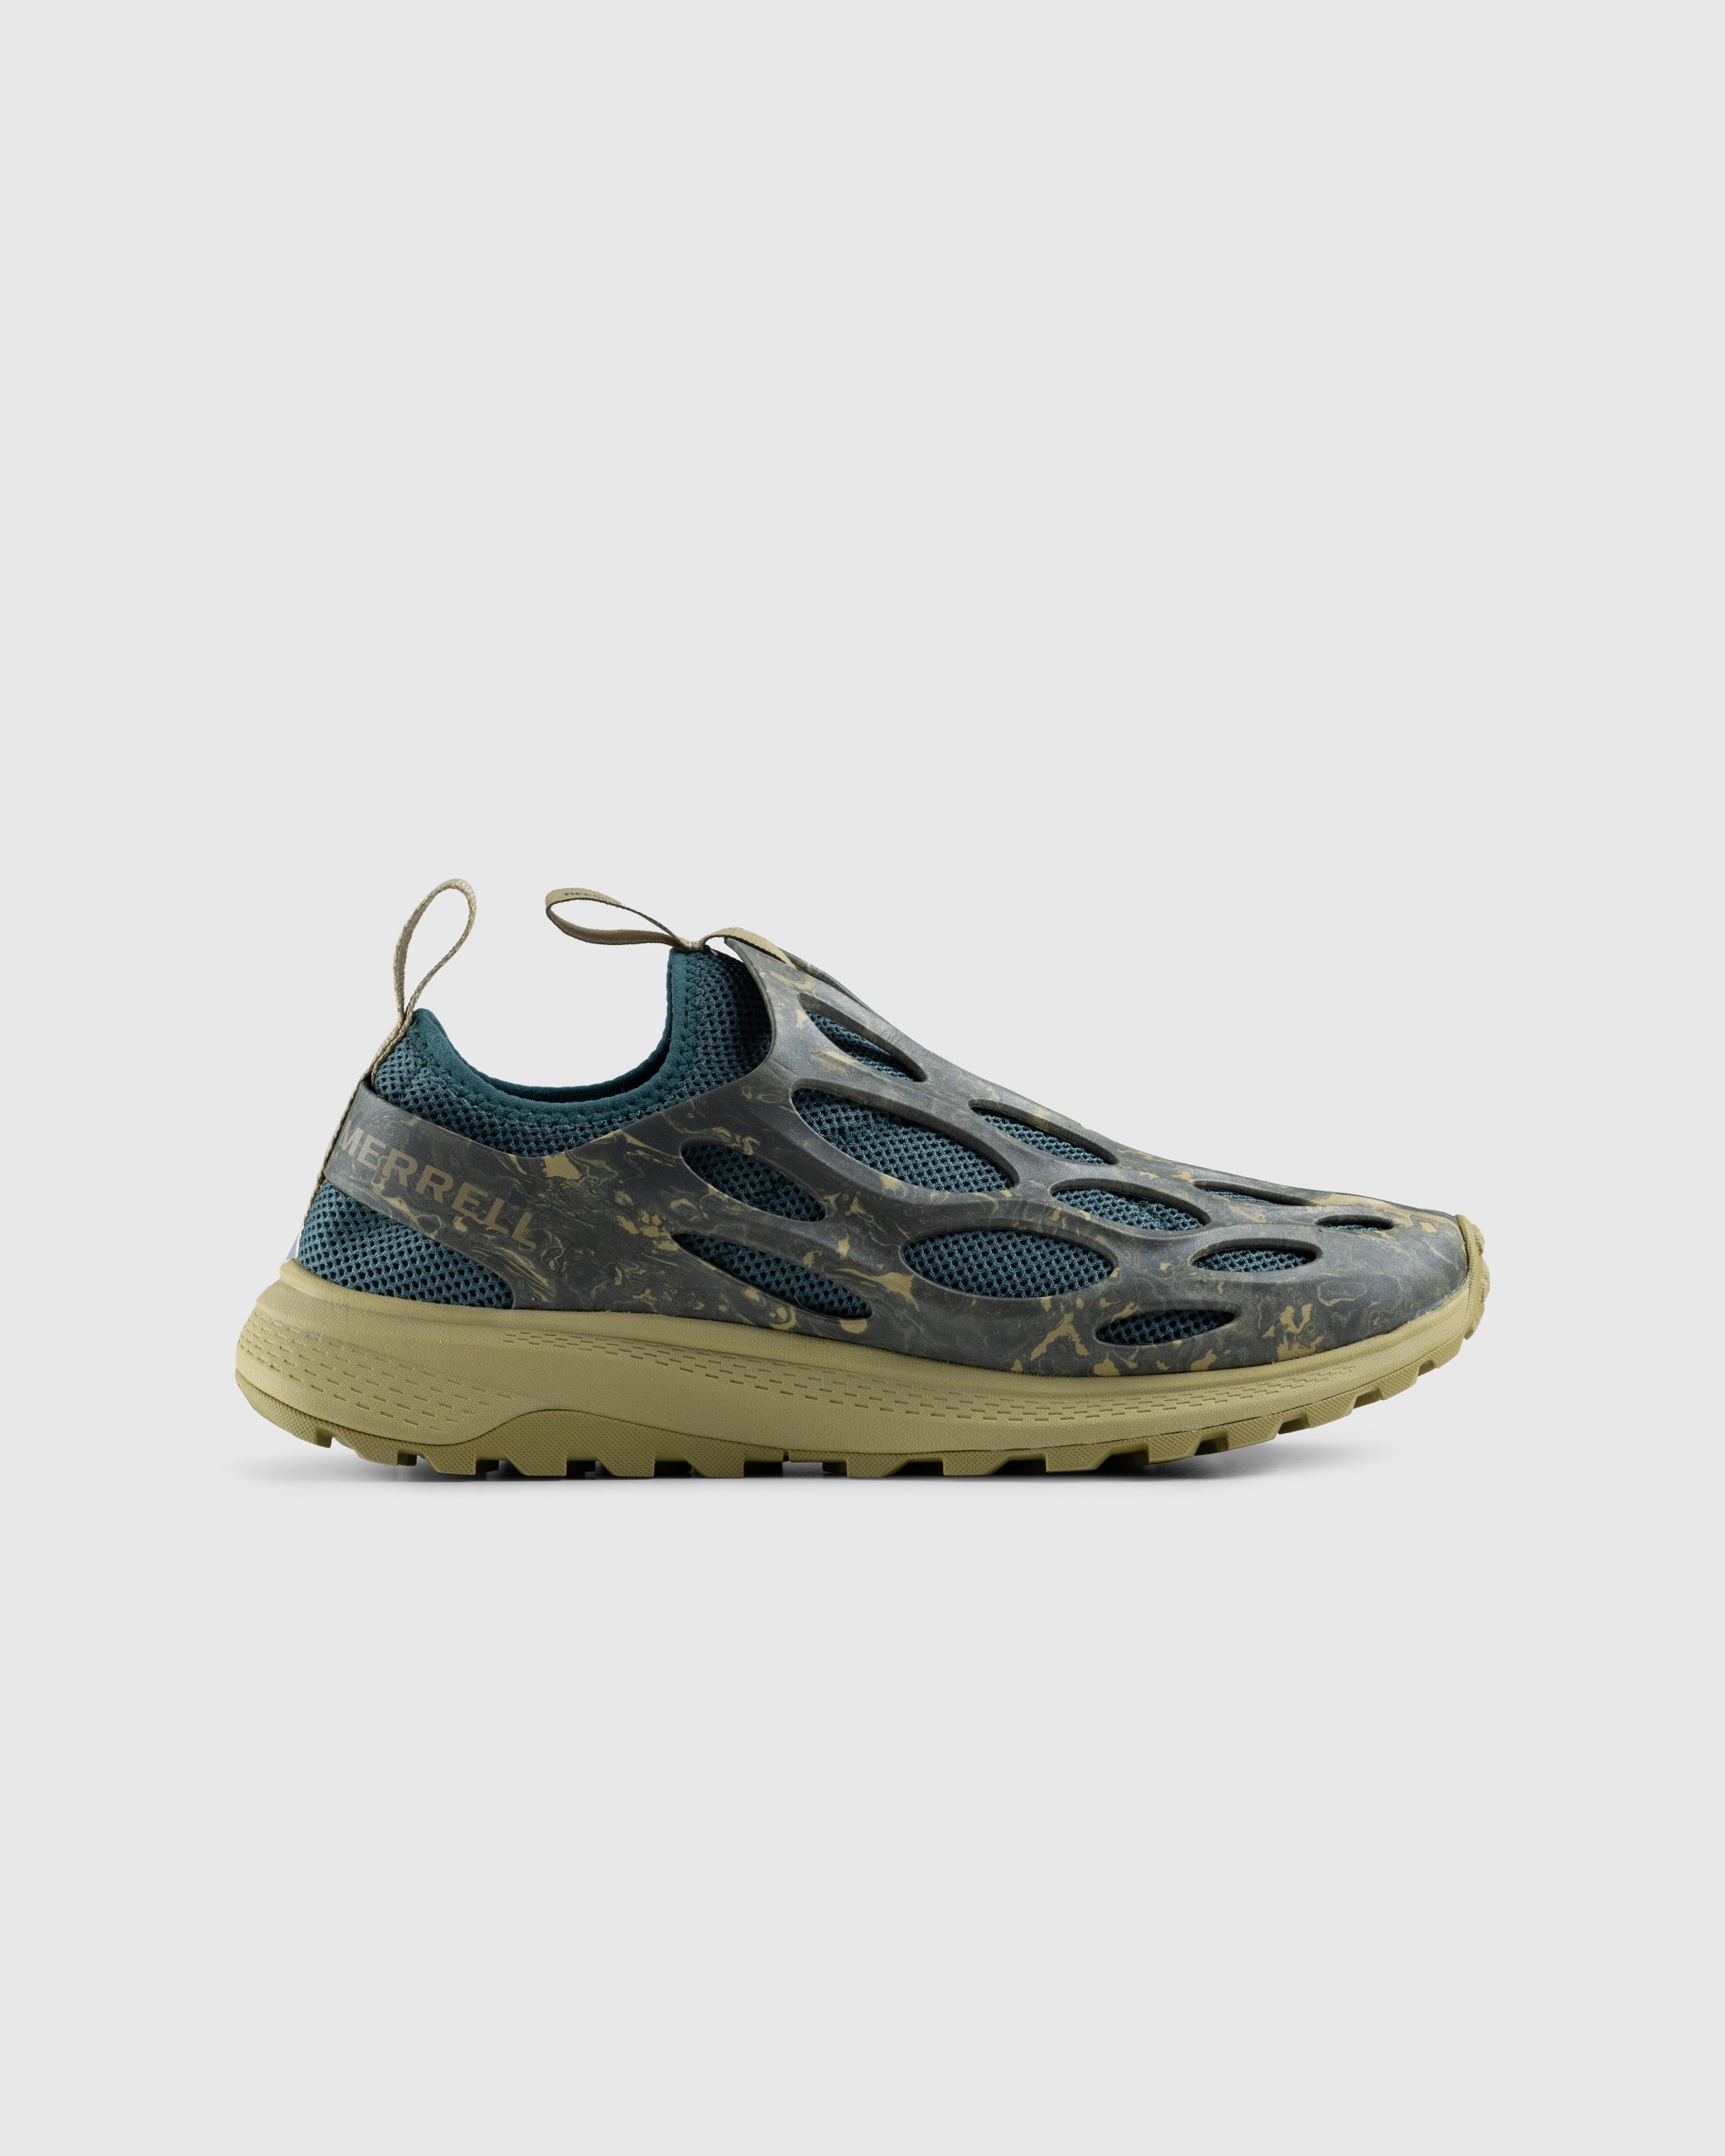 Merrell x Reese Cooper - Hydro Runner Forest Night - Footwear - Green - Image 1